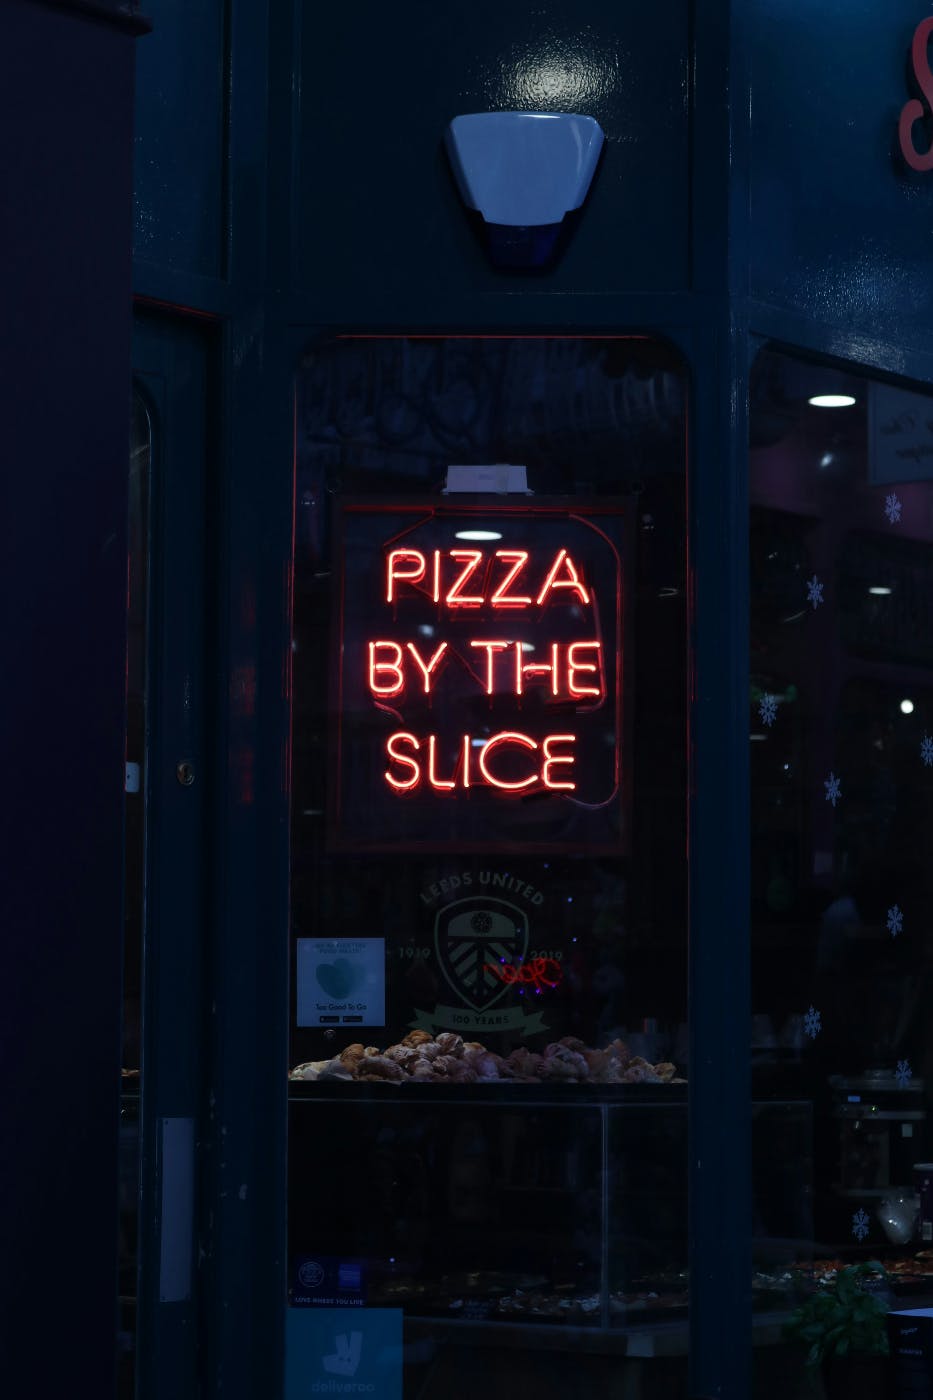 A neon sign in a shop window Pizza by the Slice